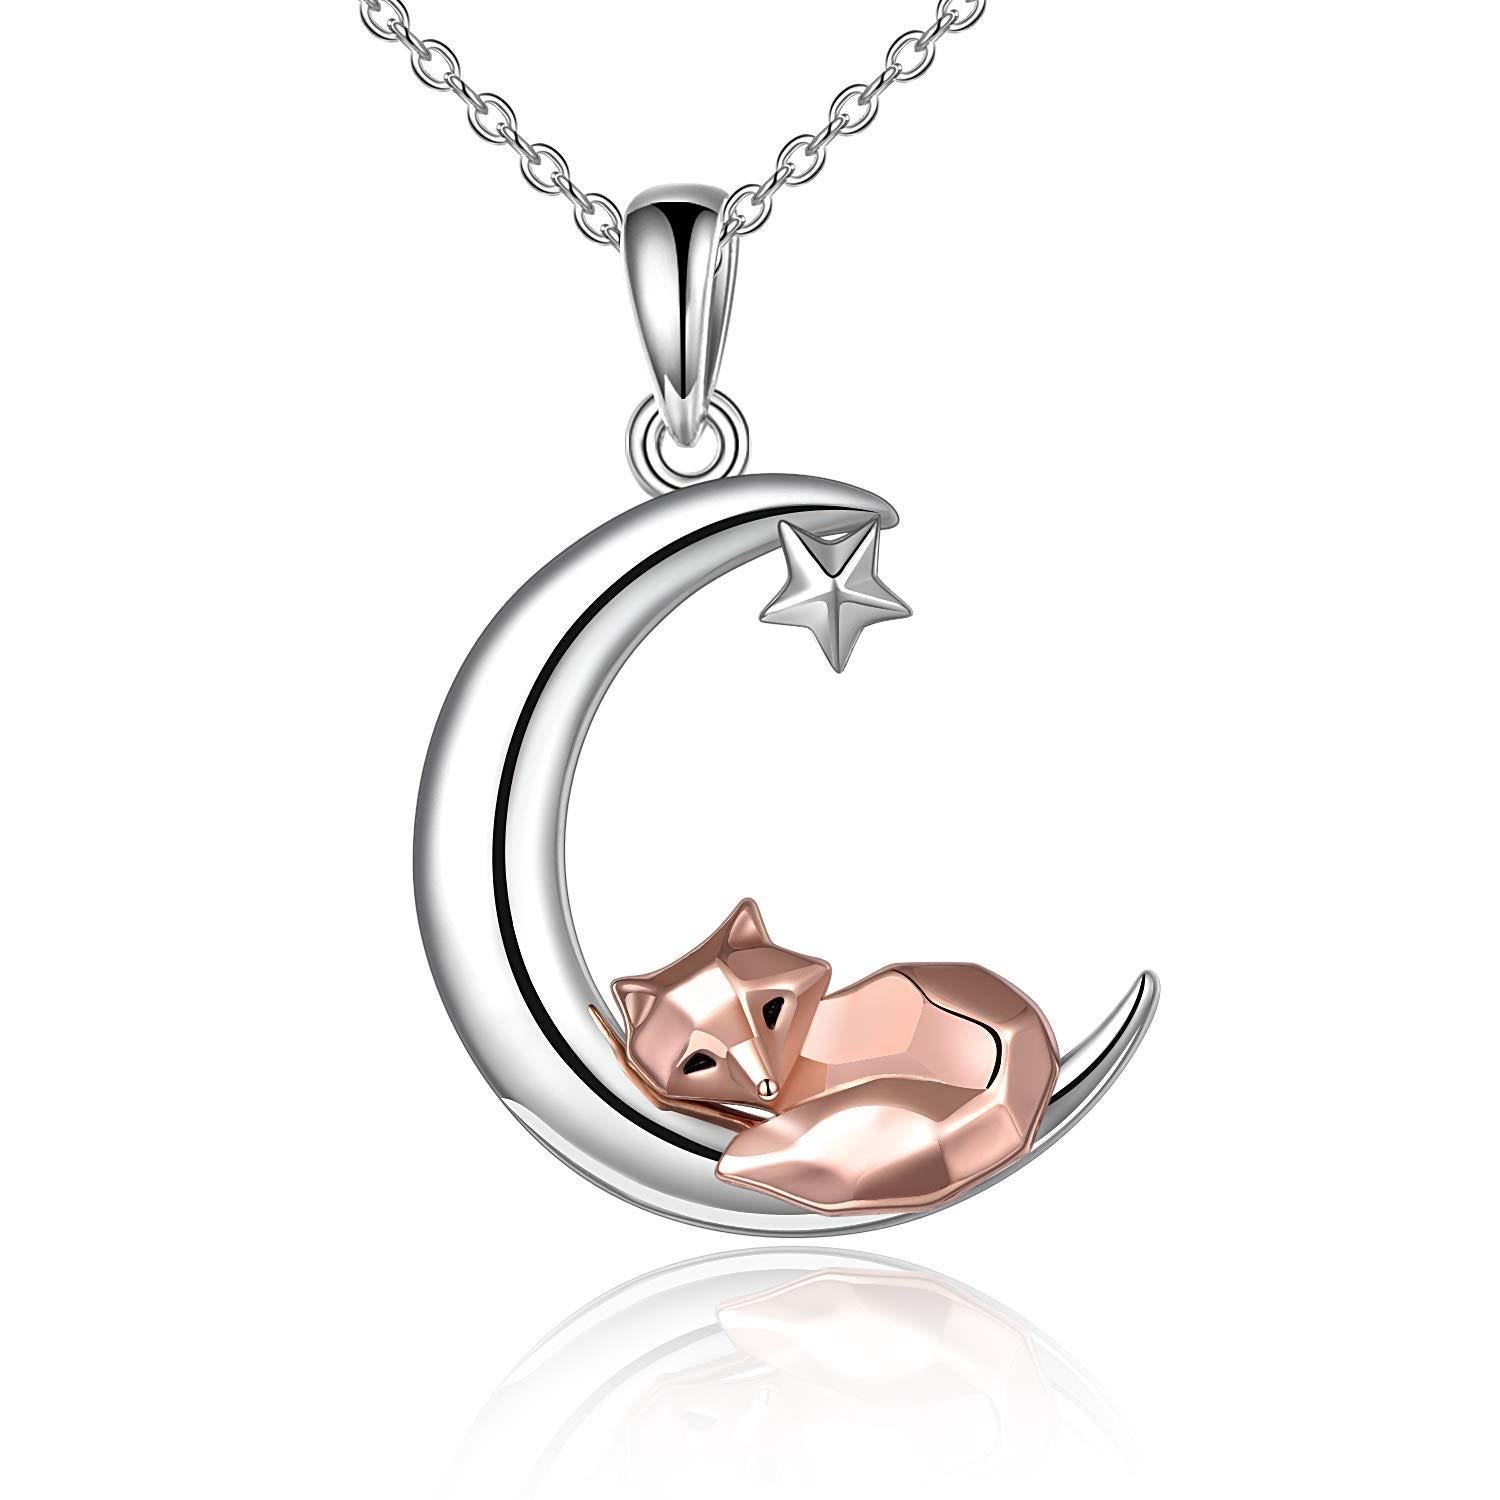 Fox Necklace Sterling Silver Cute Origami Fox Moon Pendant Jewelry